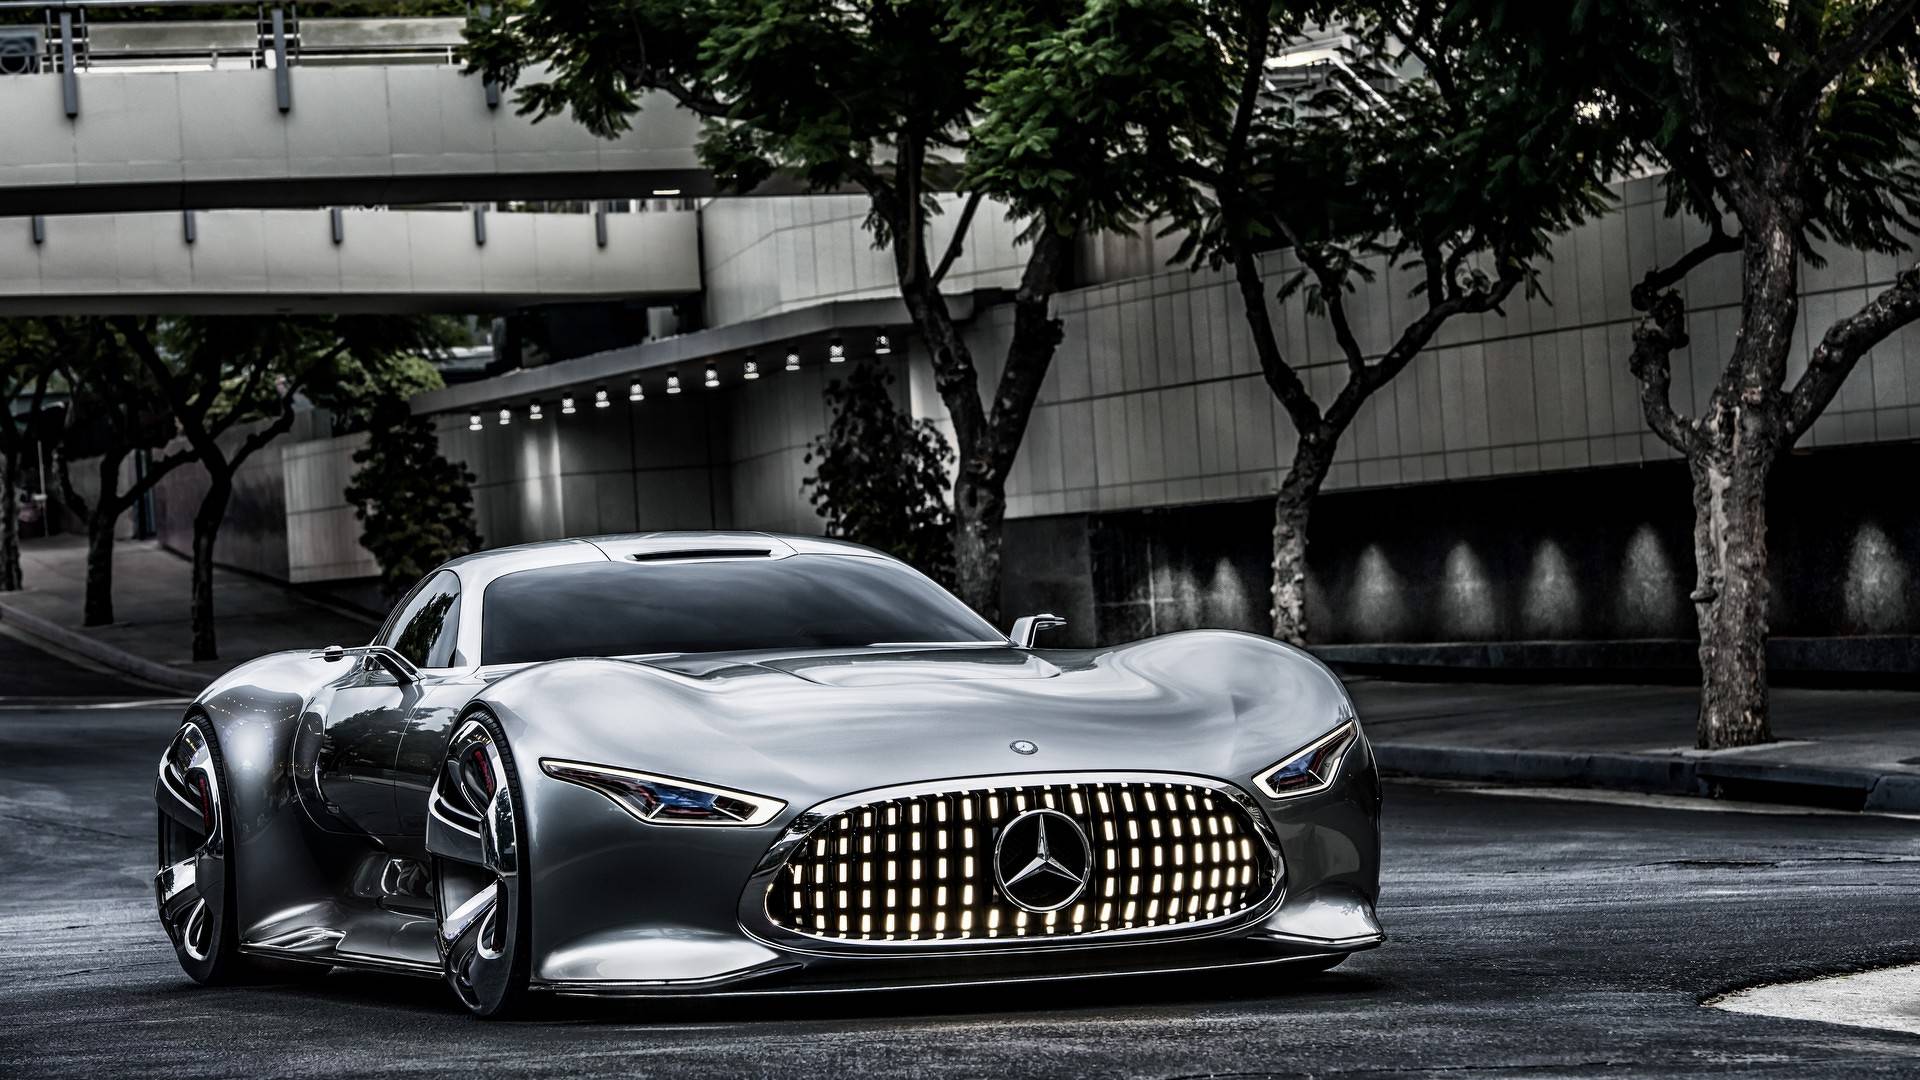 Years Later, Mercedes AMG Vision GT Still Looks Unworldly